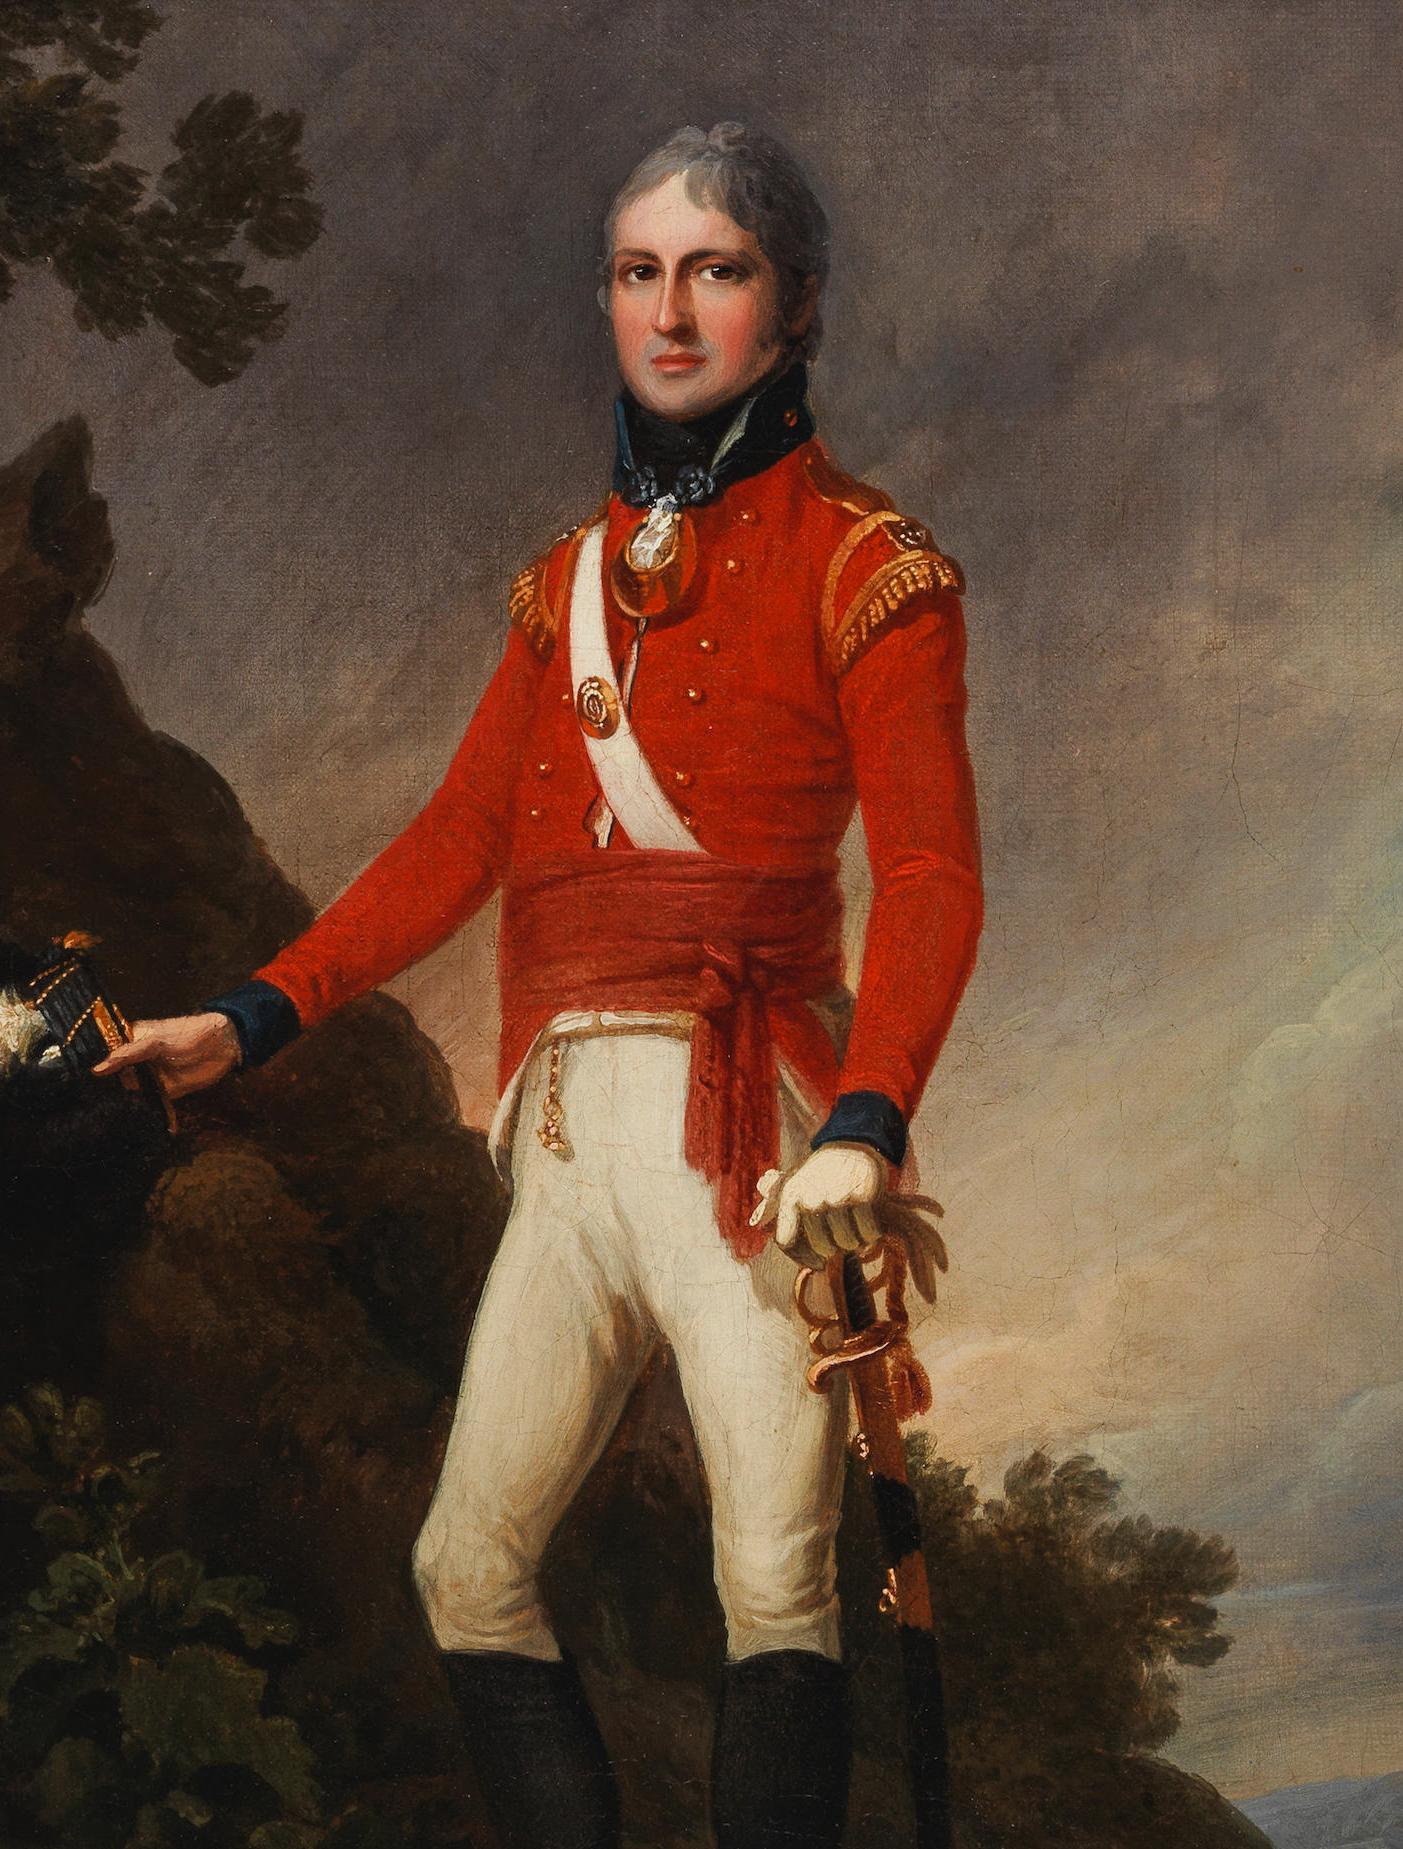 Portrait of Sir Walter Stirling 1st Baronet, Signed & Dated 1800
By William Philip James Lodder (Loder) (active 1783-1805)

On a hillside and under a moody sky, this exquisite portrait depicts a dashing young officer proudly wearing an elaborate